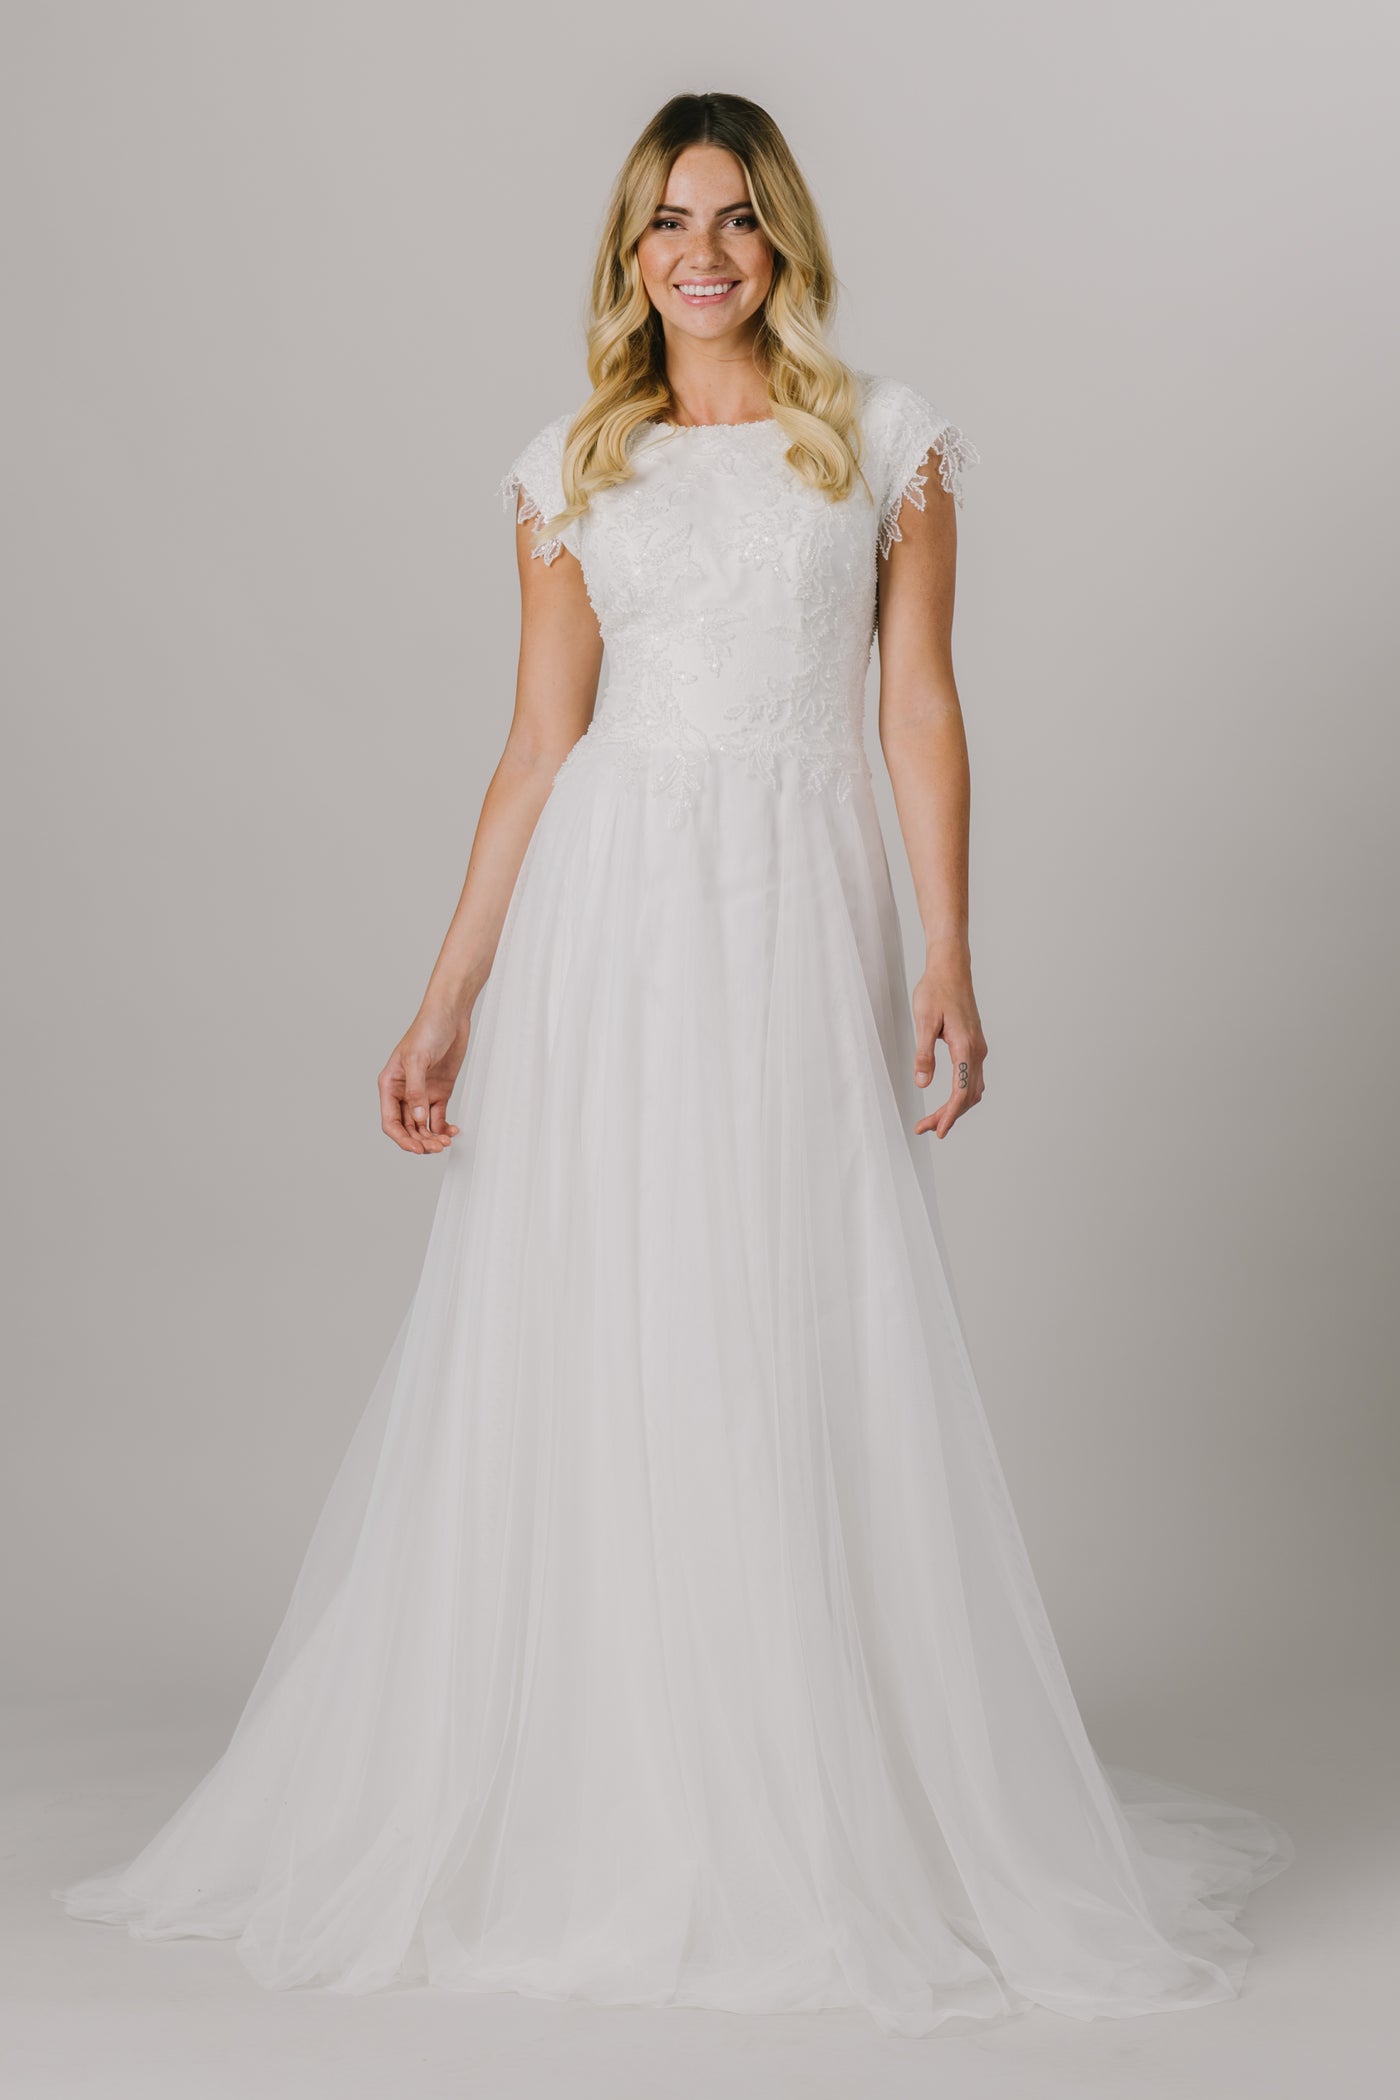 This a-line modest wedding dress features the most unique beading throughout the bodice. This lightweight and flowy gown features a boat neckline and gorgeous short sleeves.   ﻿Style Love: This dress is part of our brand new, exclusive LatterDayBride wedding dress collection.